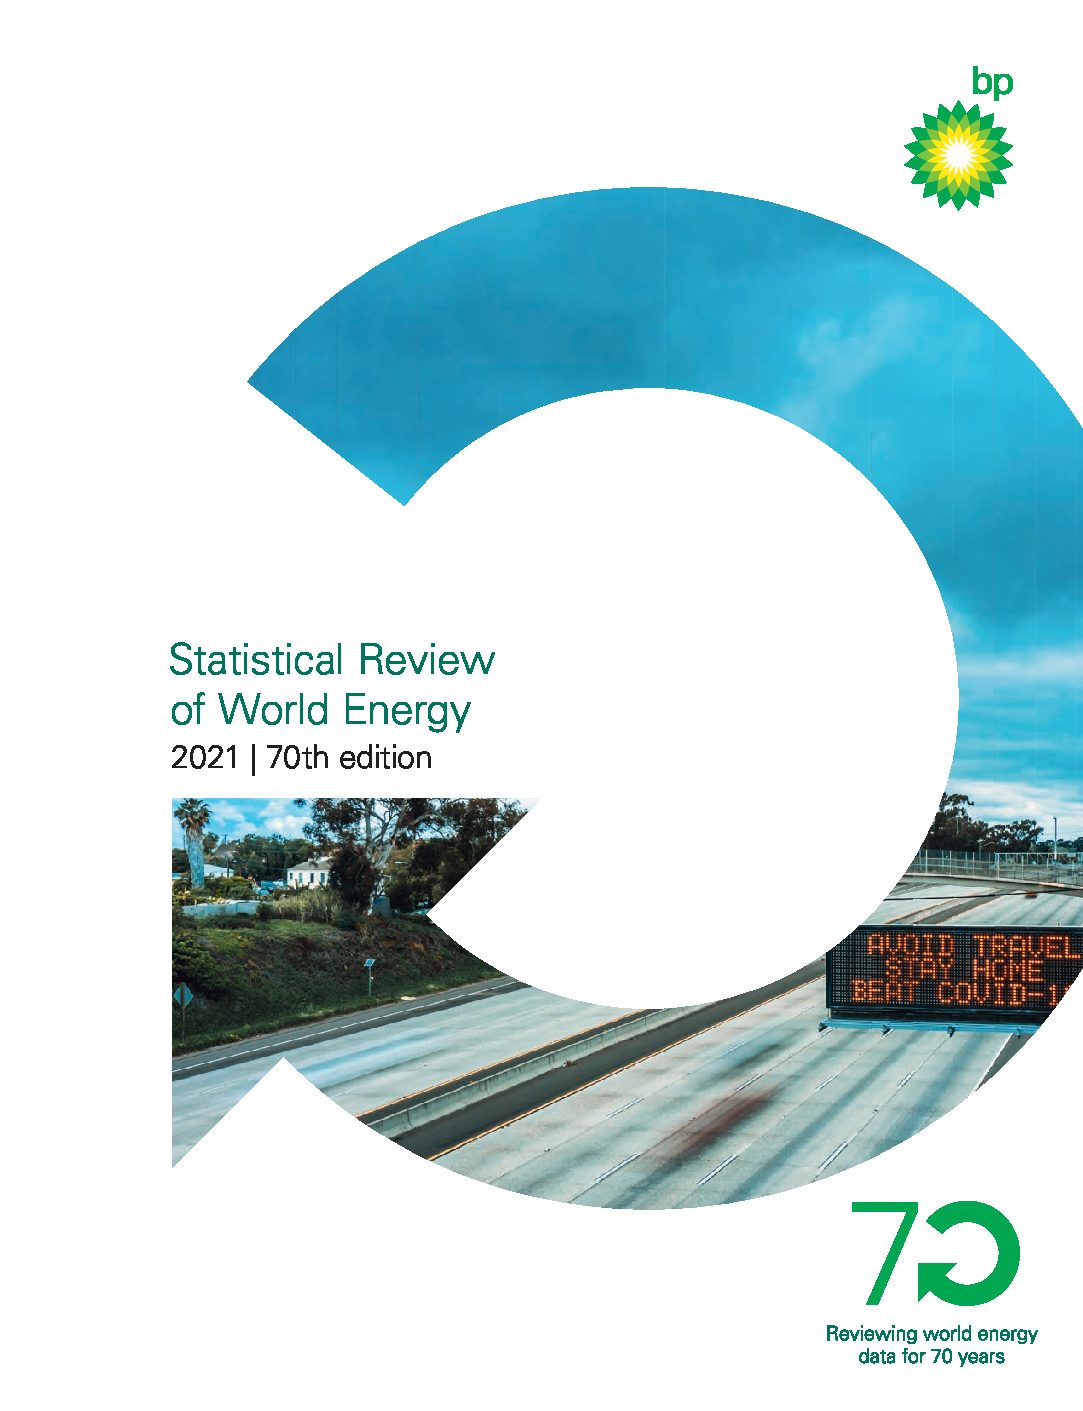 bp – Statistical Review of World Energy – 70th edition